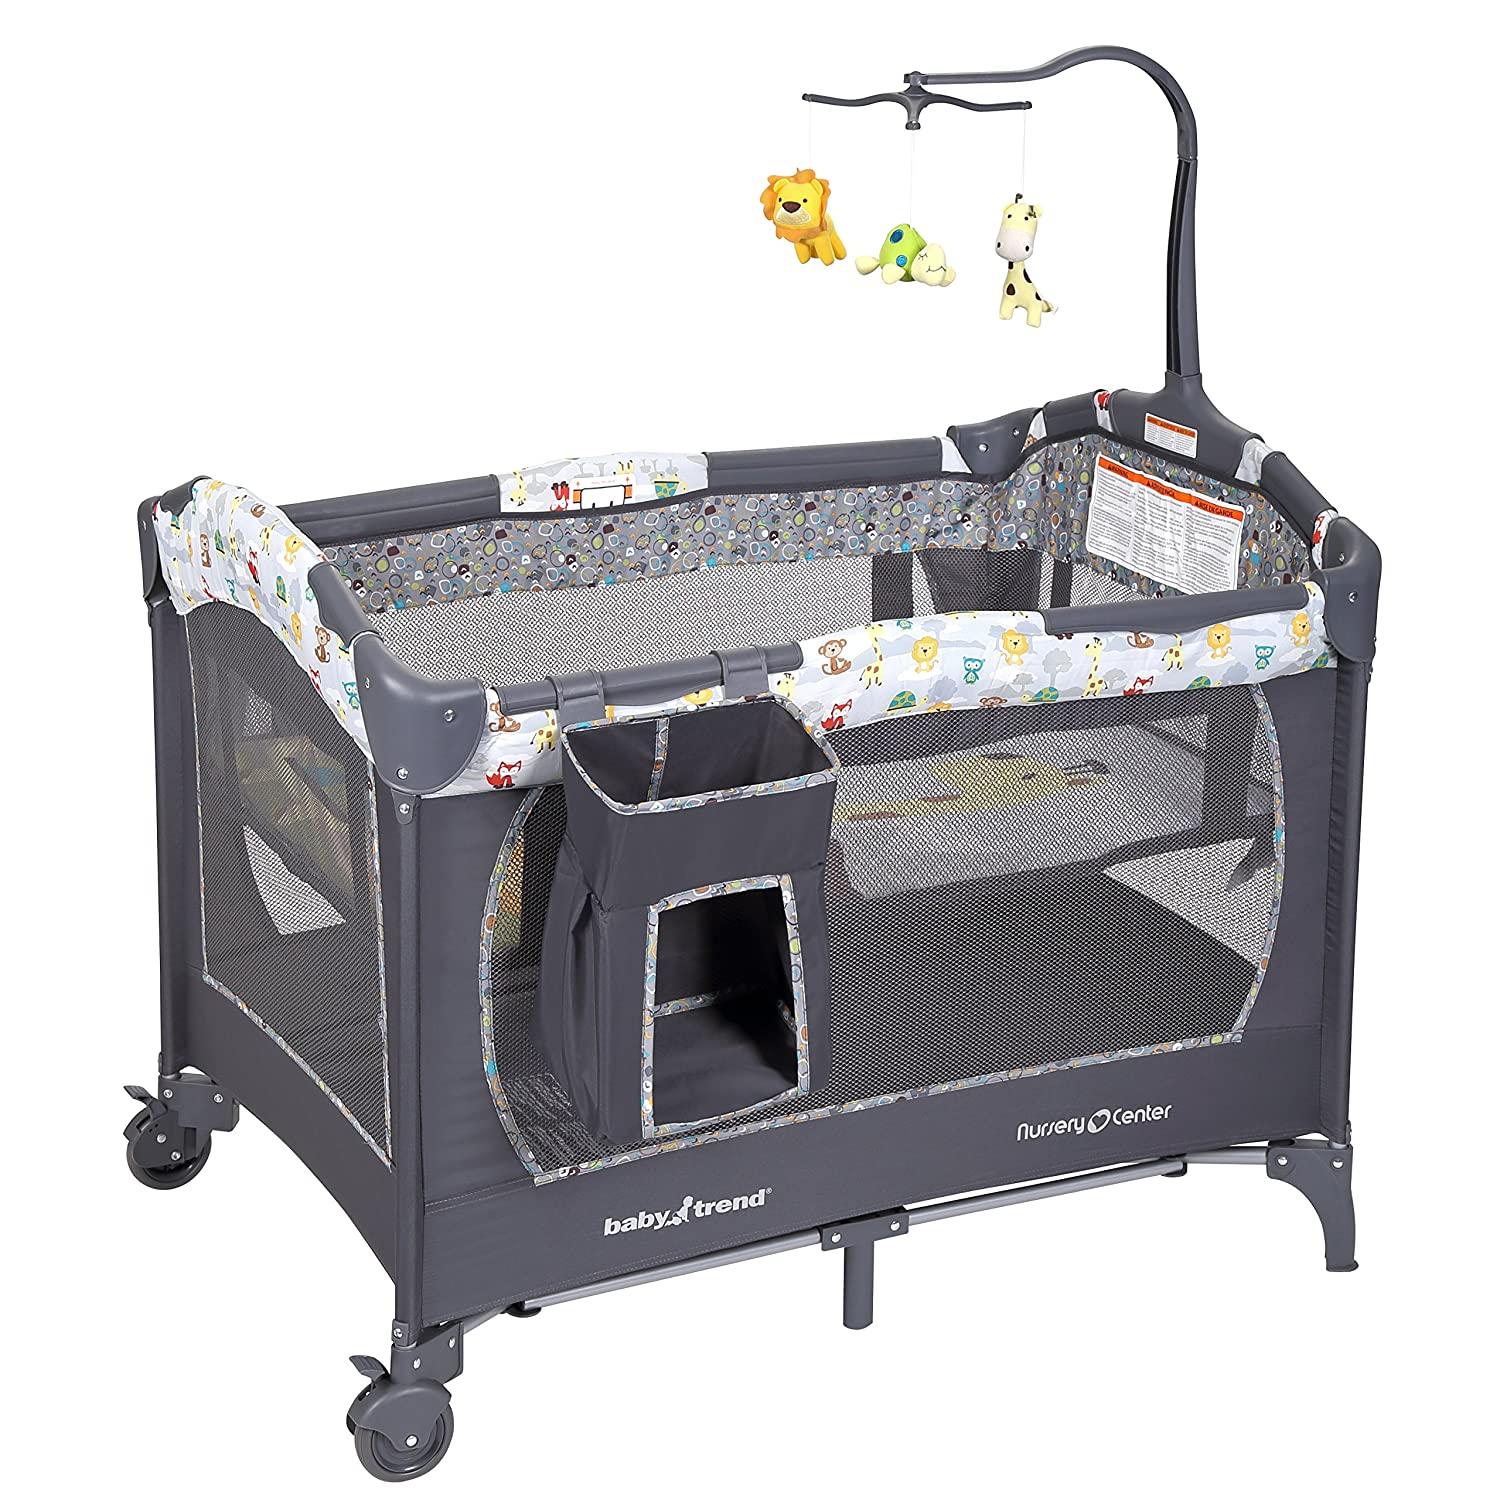 Baby Trend Nursery Center Playard for $46.08 Shipped